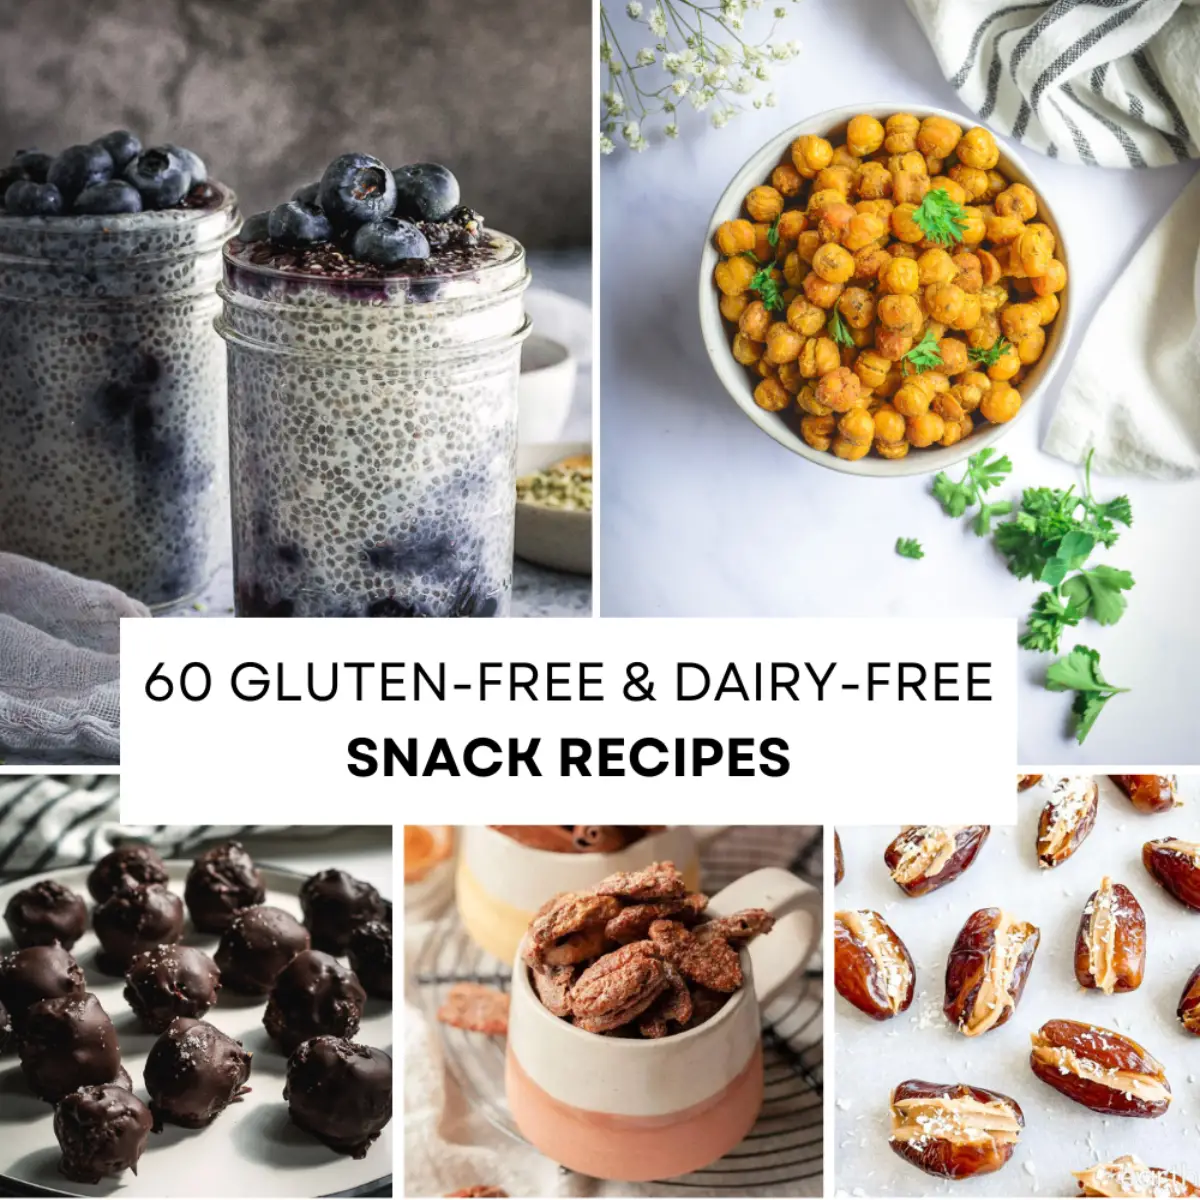 Gluten and Dairy Free Living Made Easy - Calm Eats